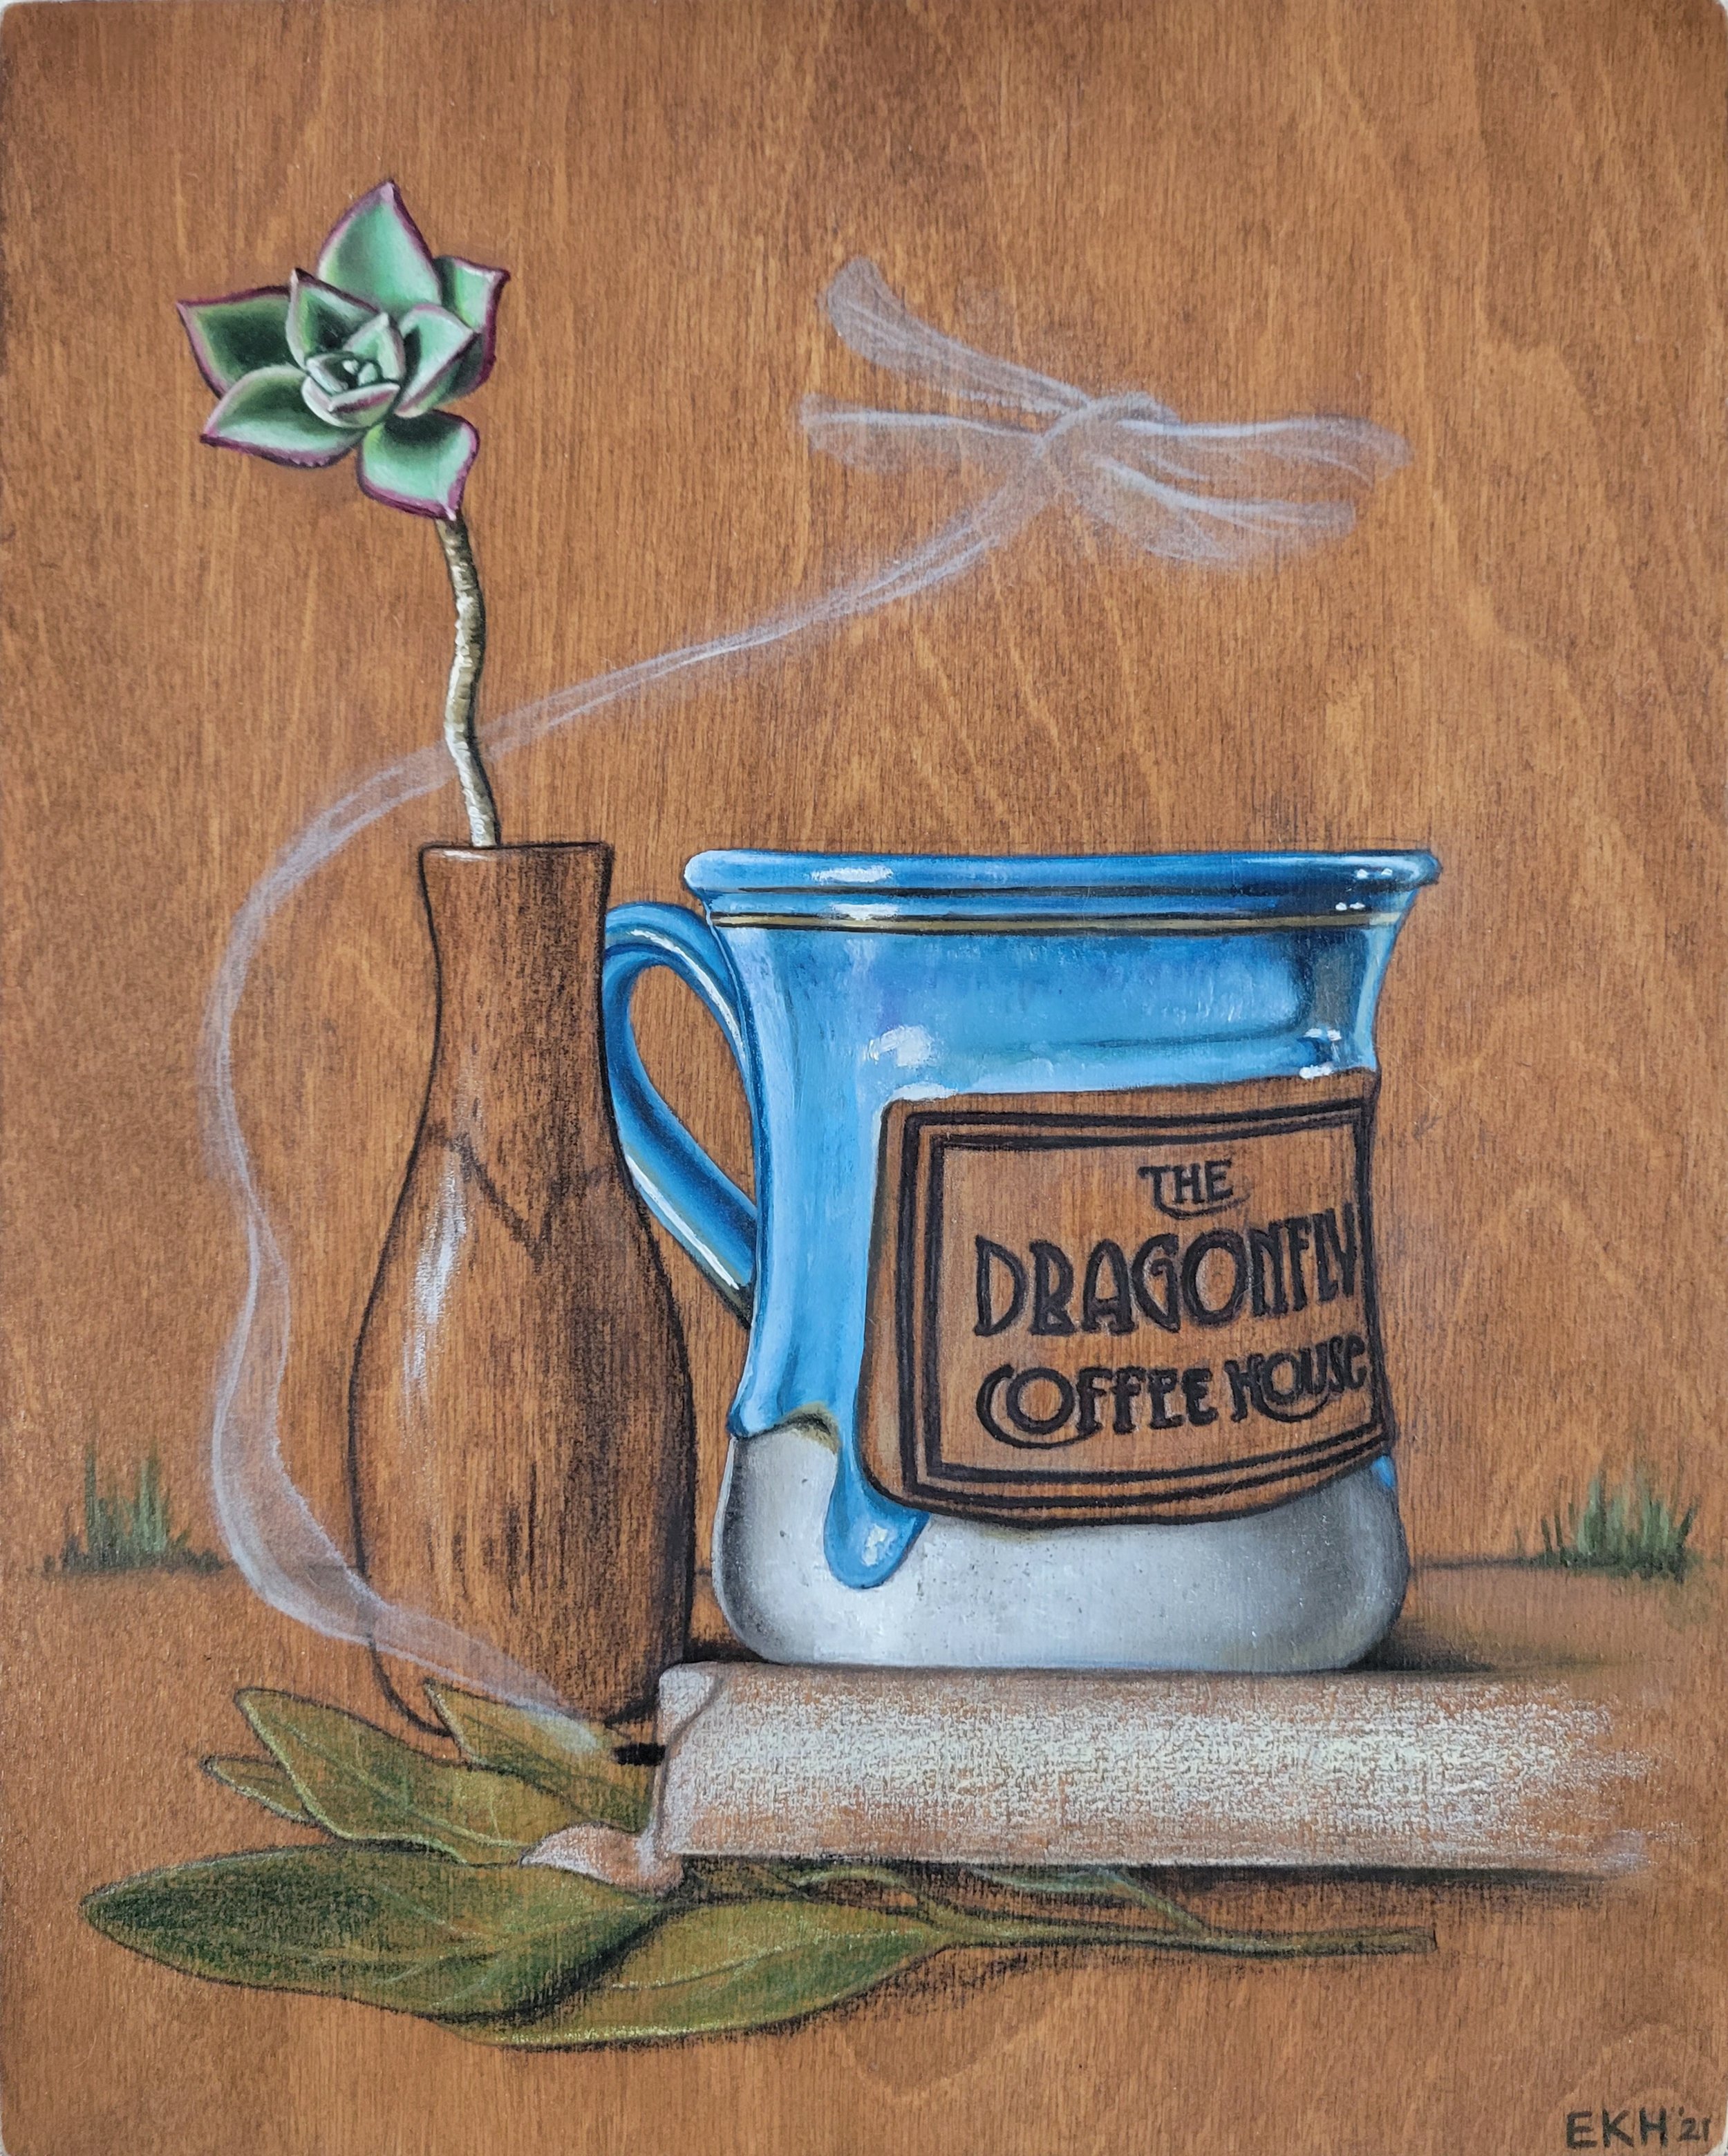 Dragonfly Coffee House